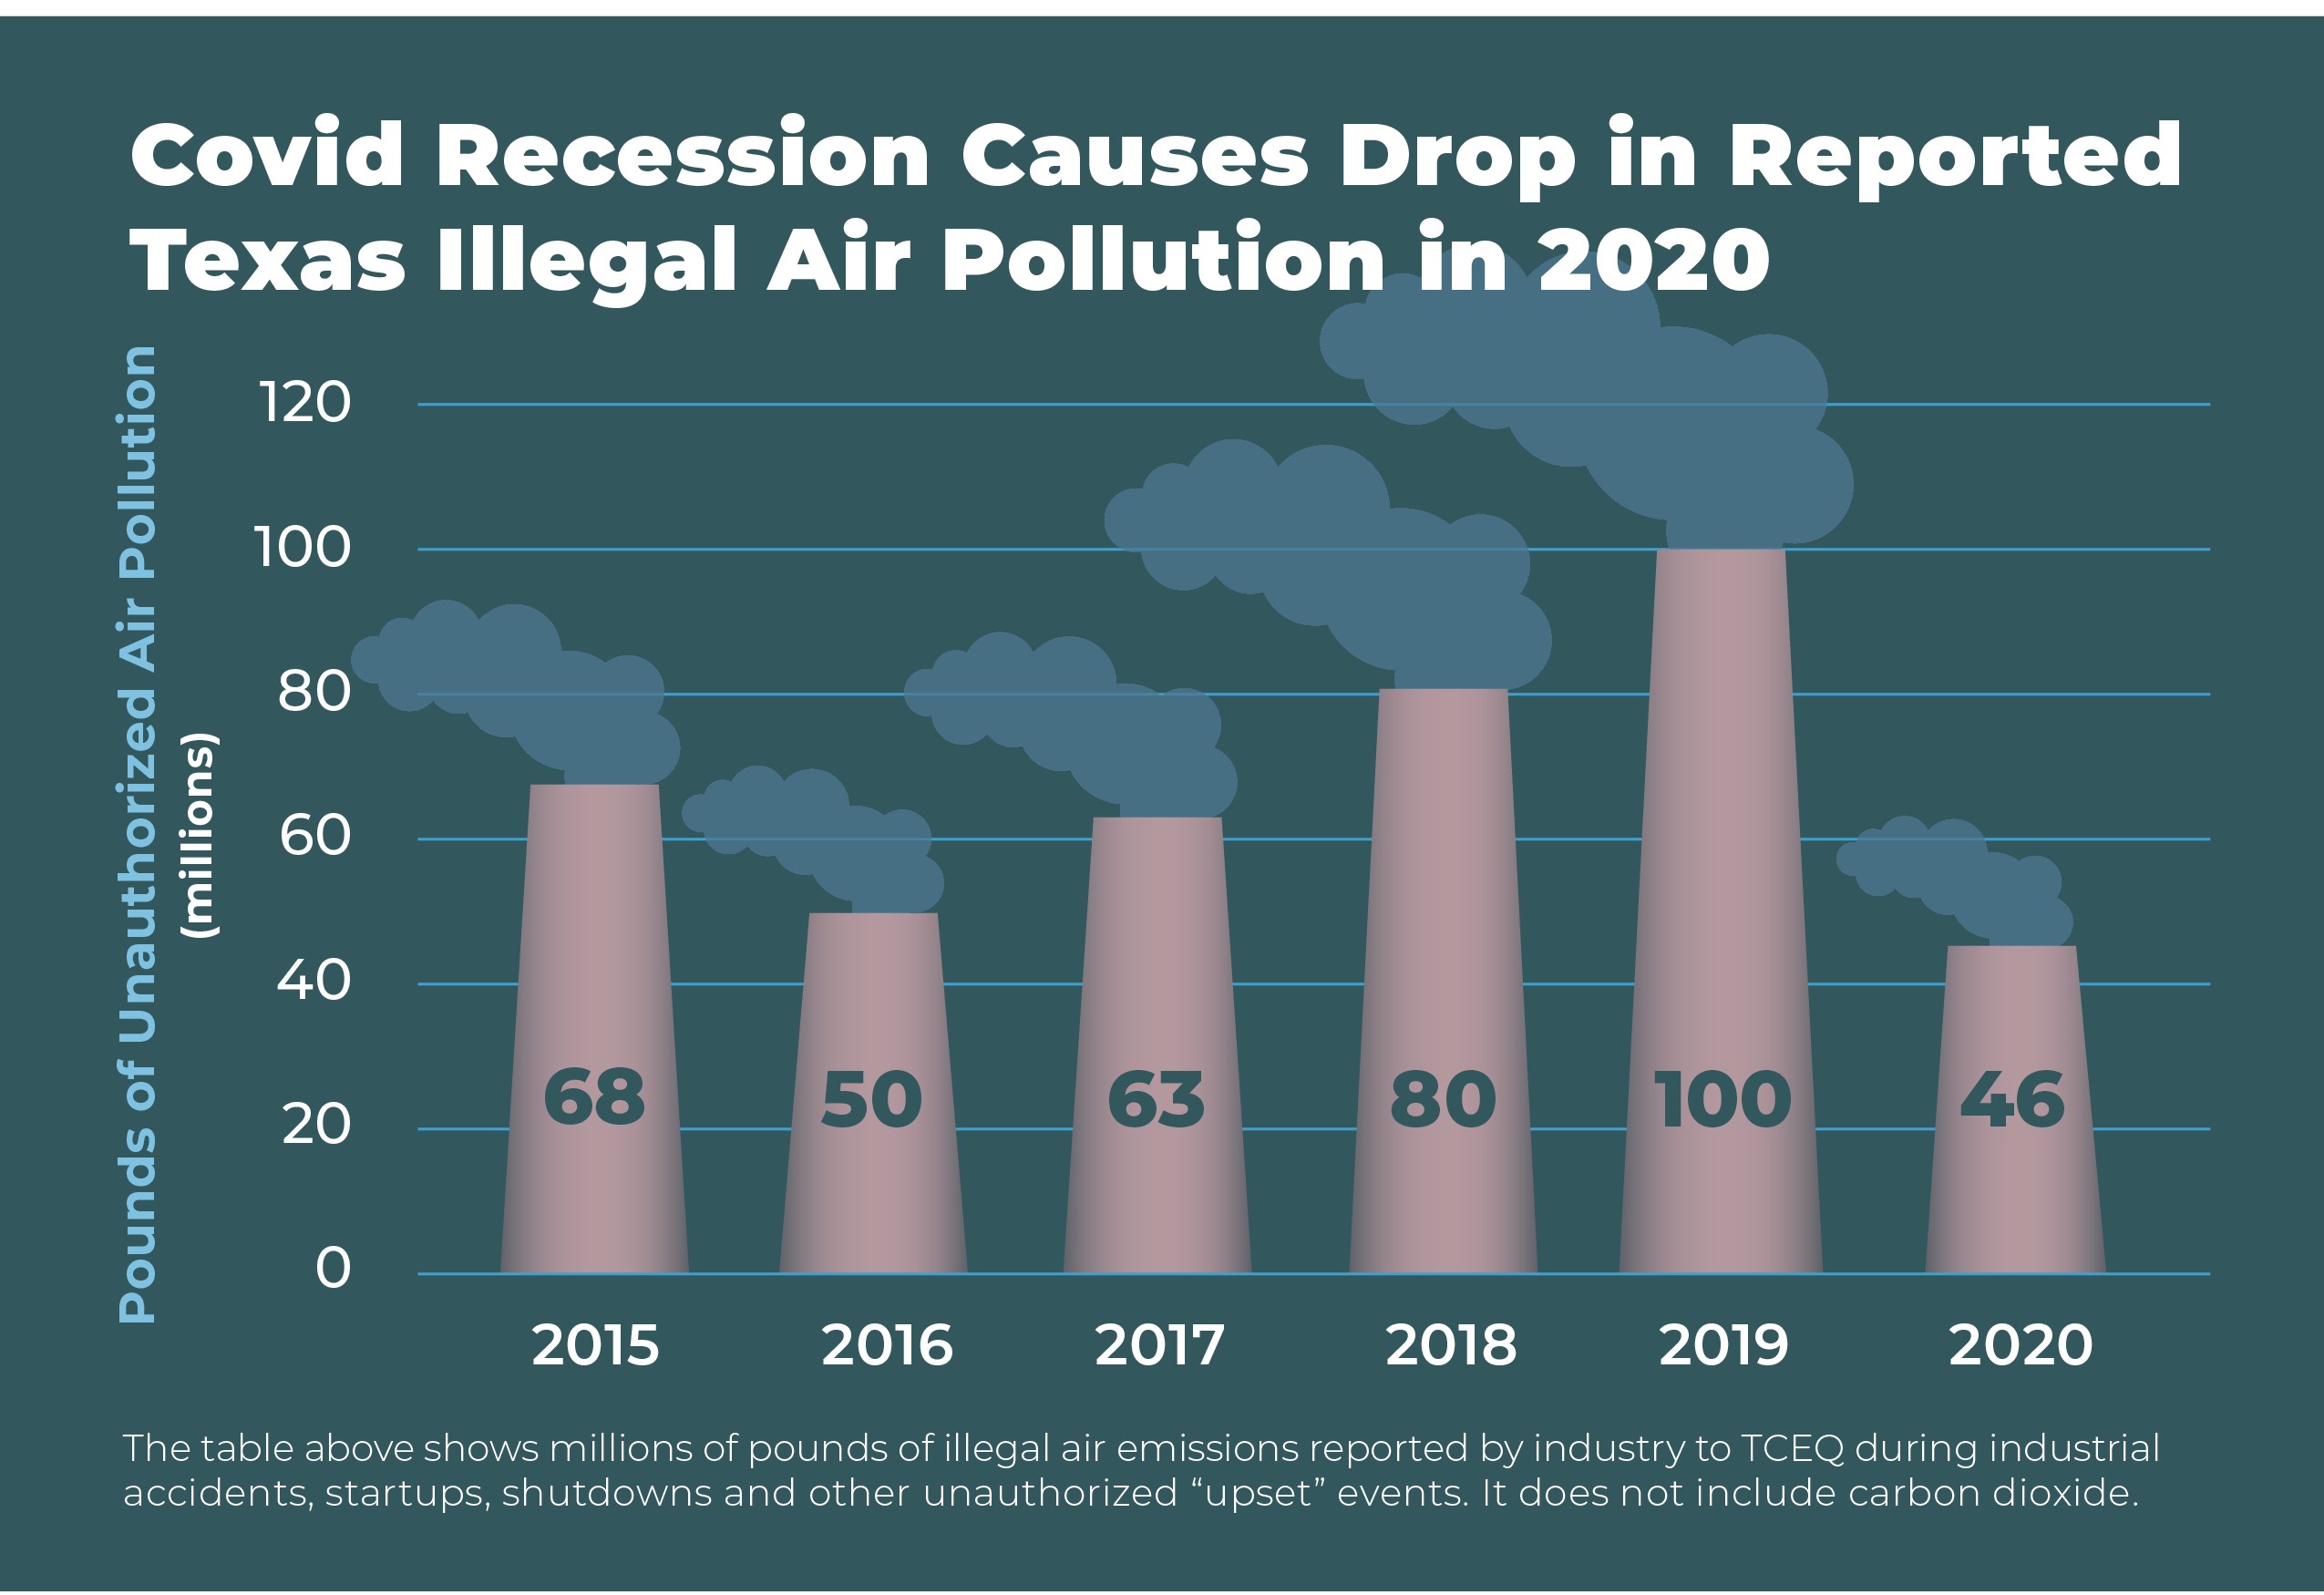 In Texas, Illegal air pollution fell 54 percent in 2020